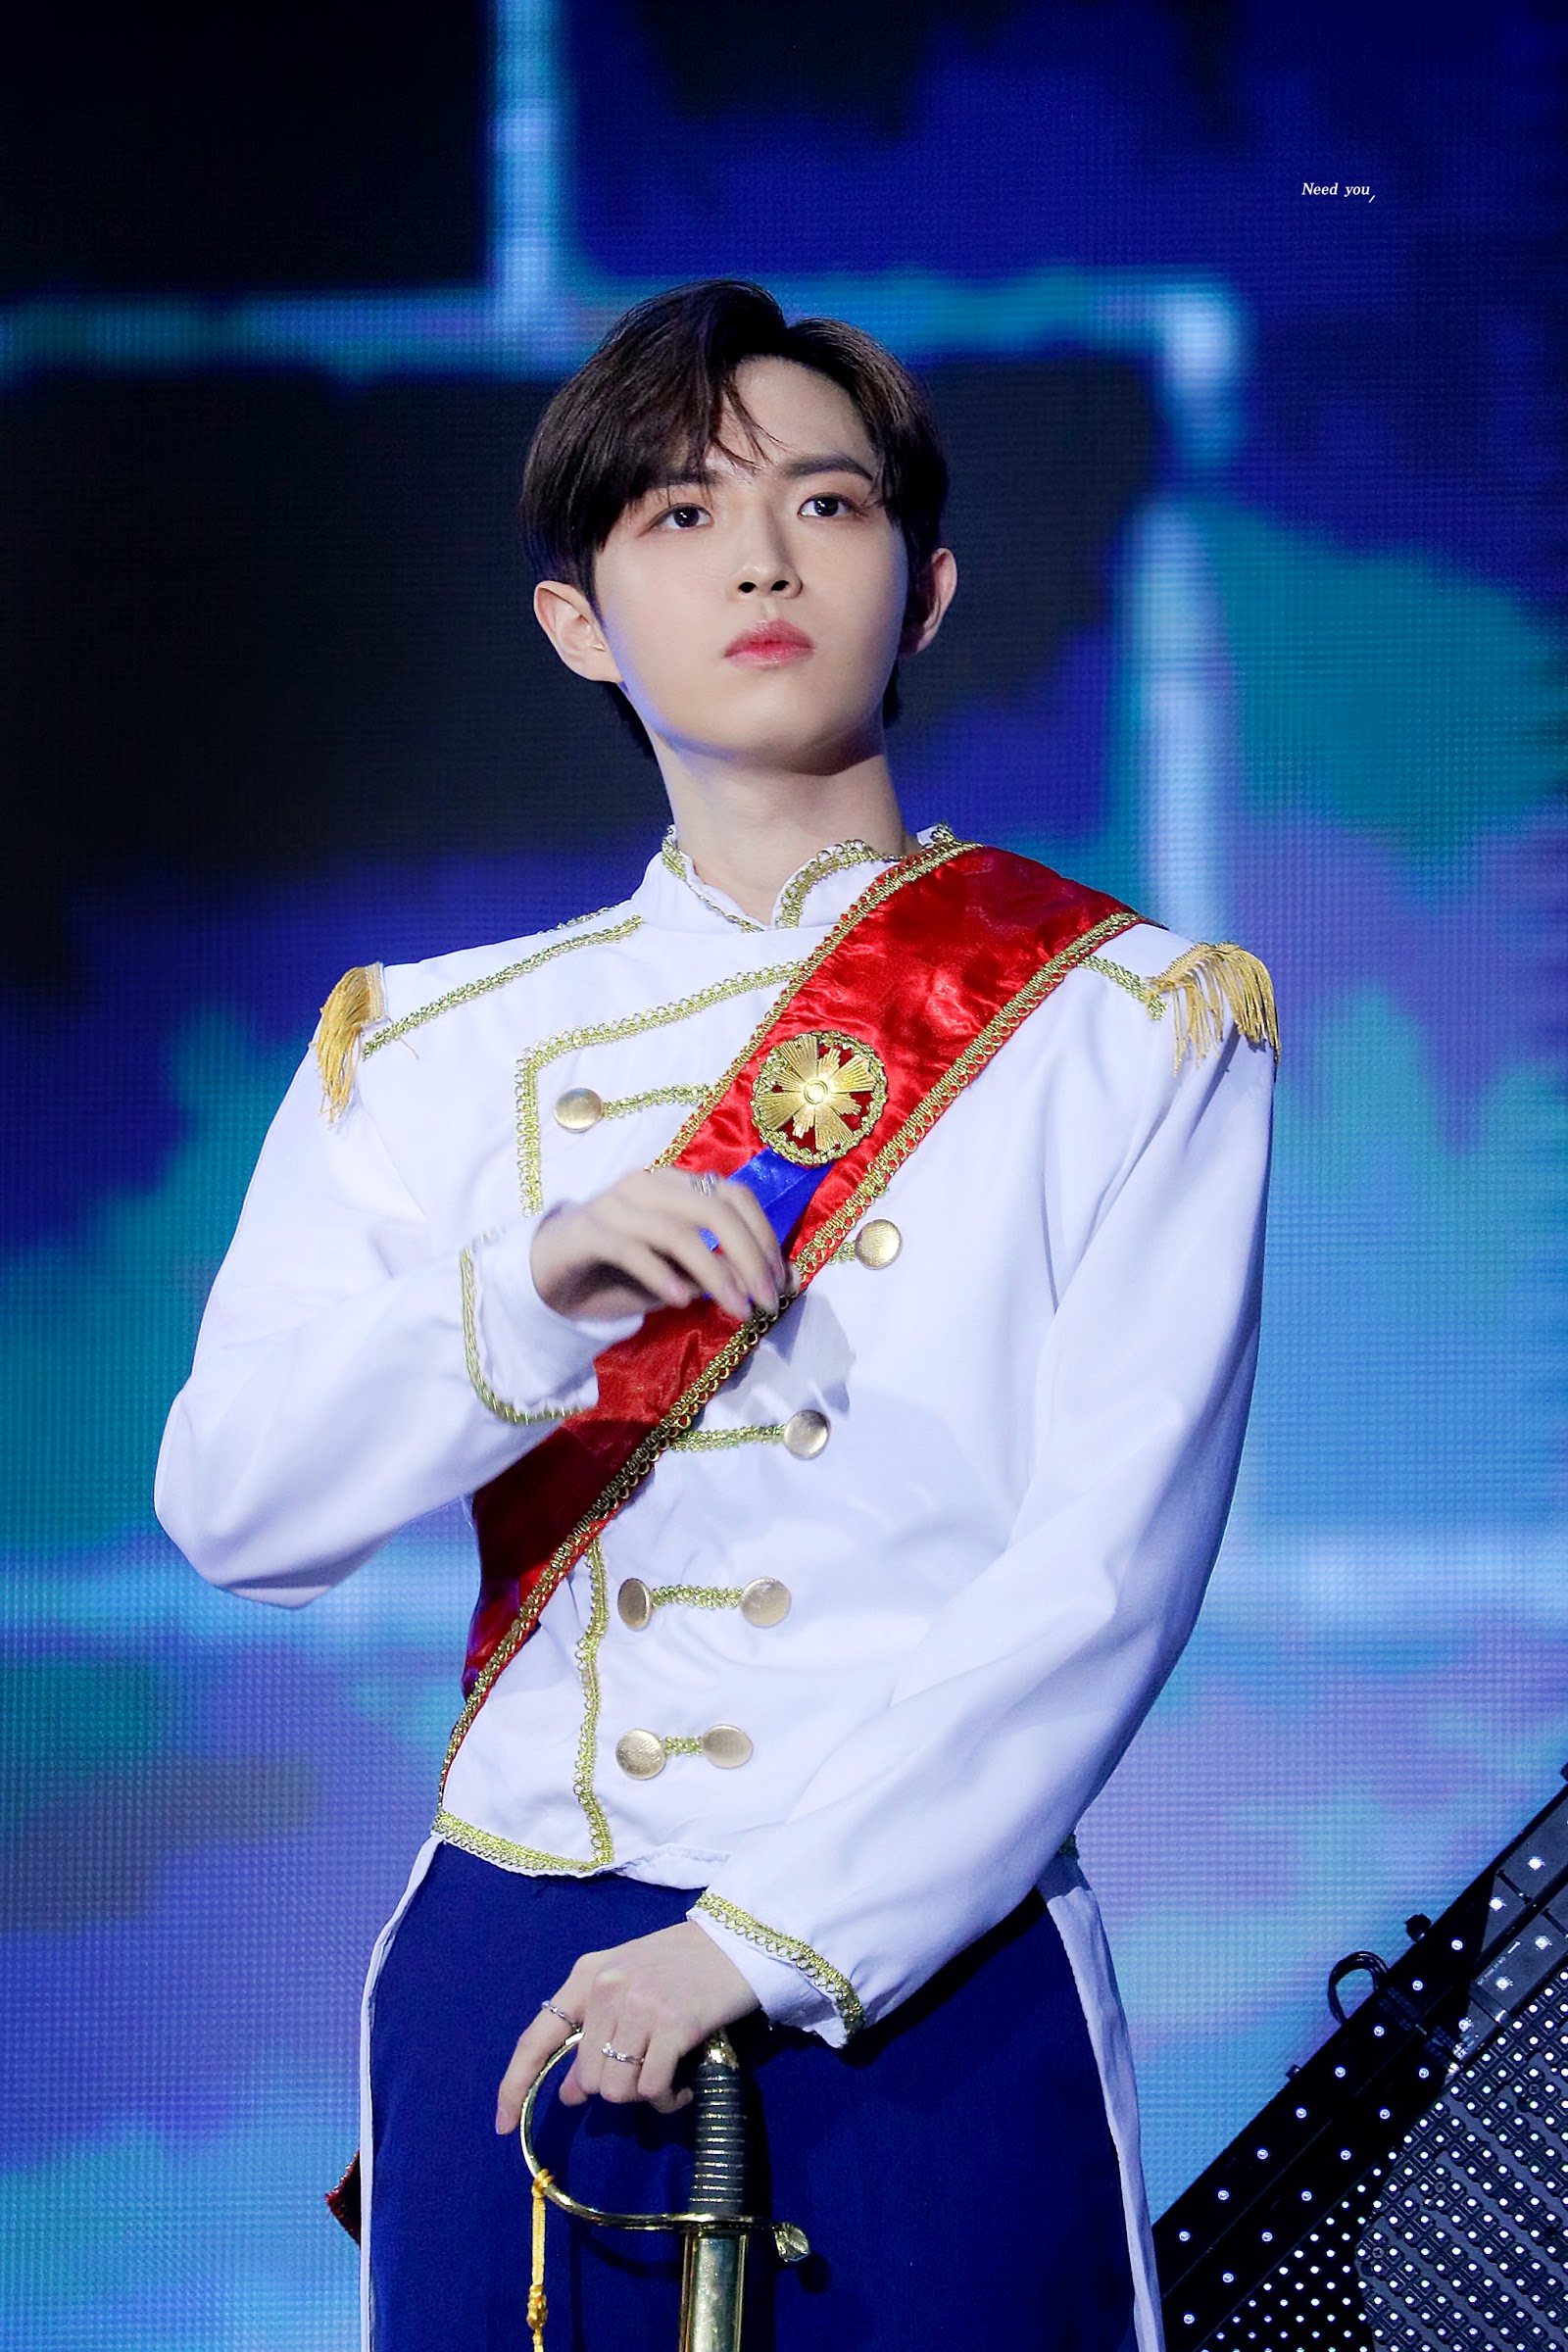 Kim Jaehwan Looks Like A Knight In Shining Armor And You Might Fall In Love Seeing It